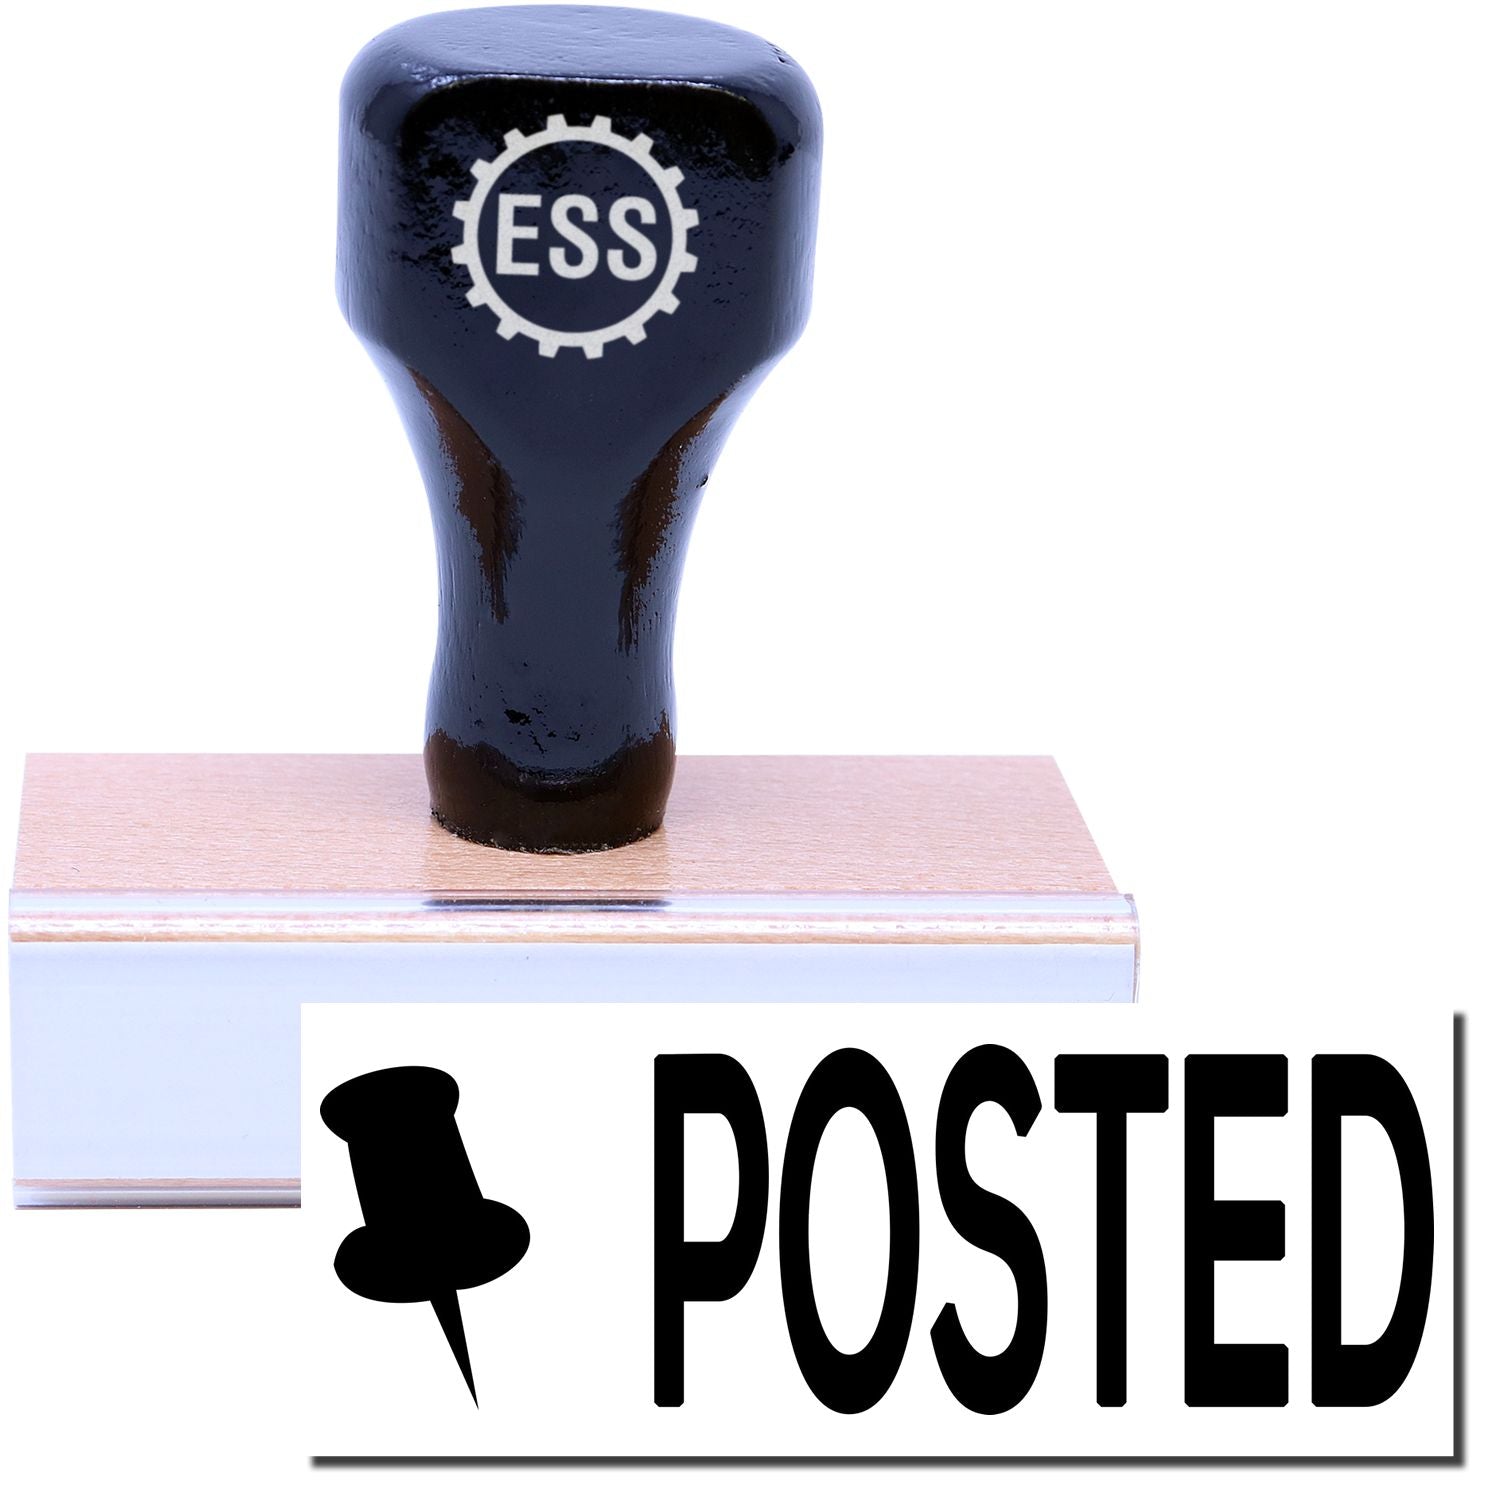 A stock office rubber stamp with a stamped image showing how the text "POSTED " in a large bold font with a thumbtack image on the left side is displayed after stamping.